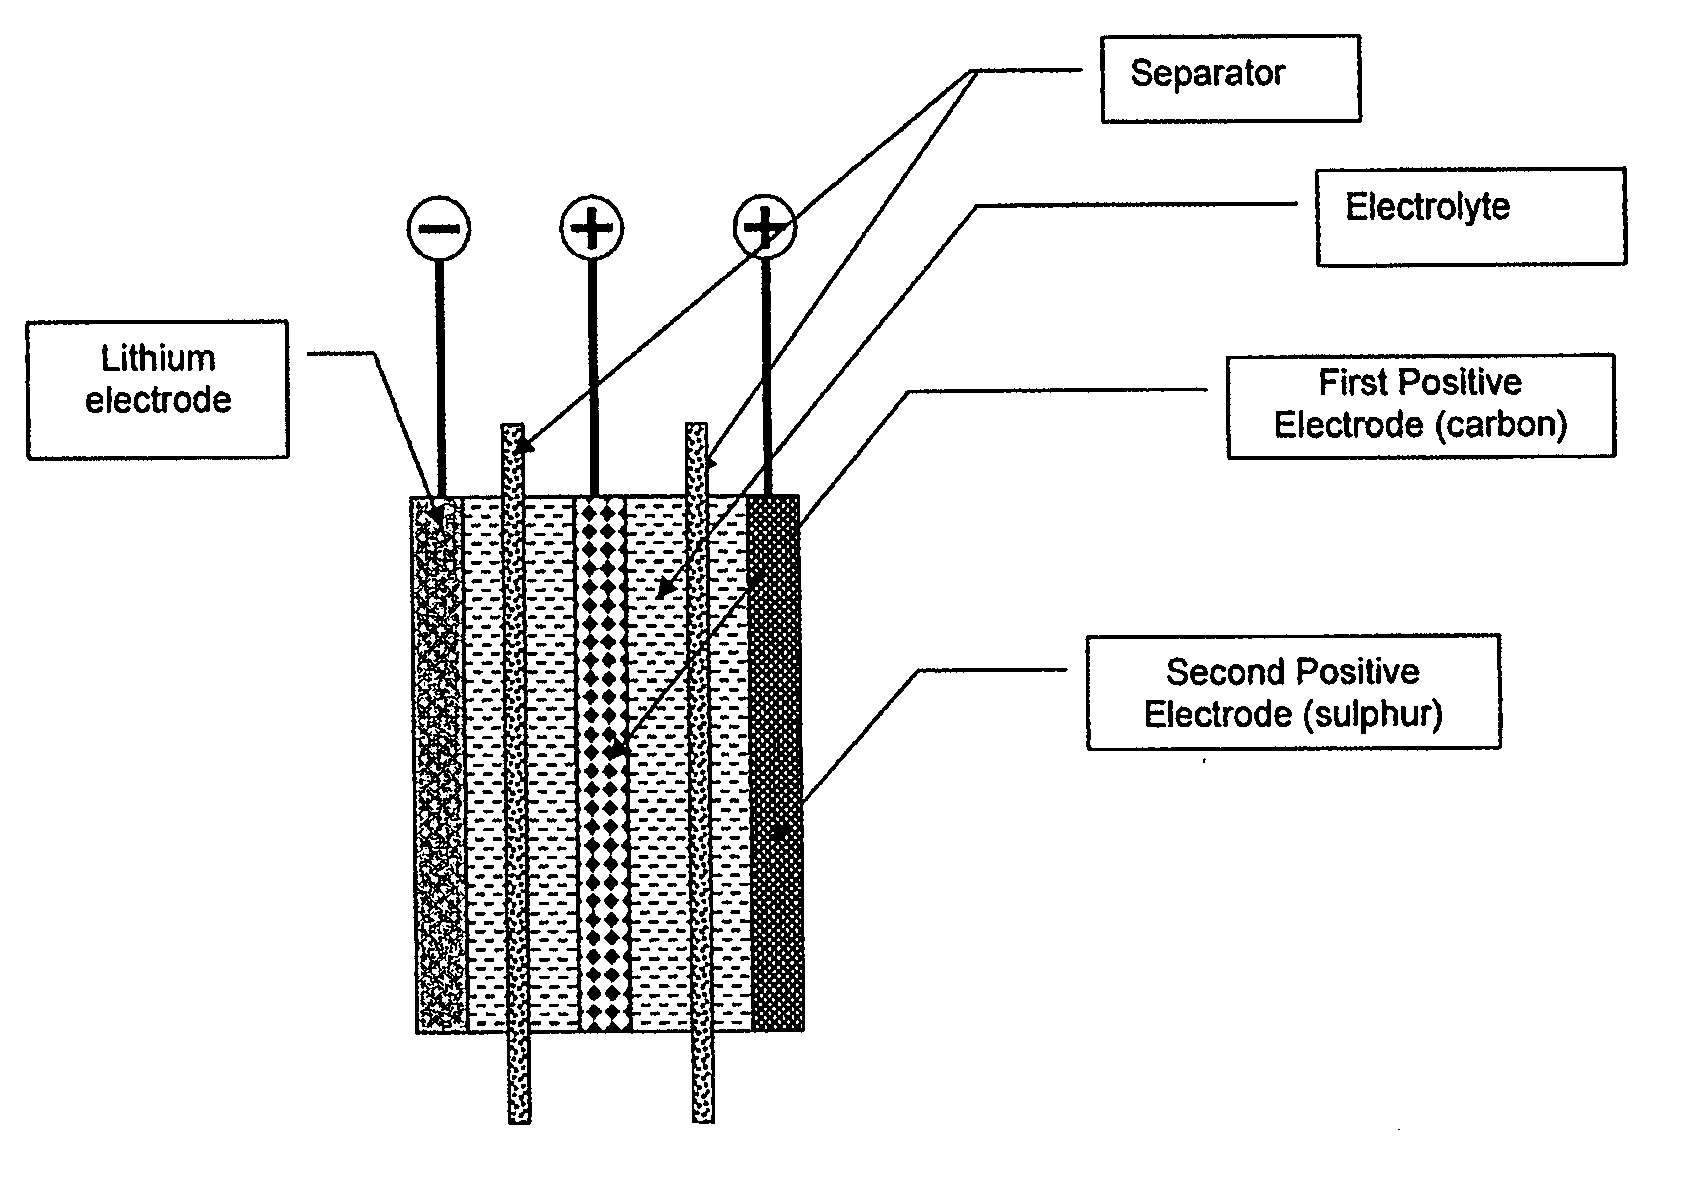 Lithium-sulphur battery with a high specific energy and a method of operating same